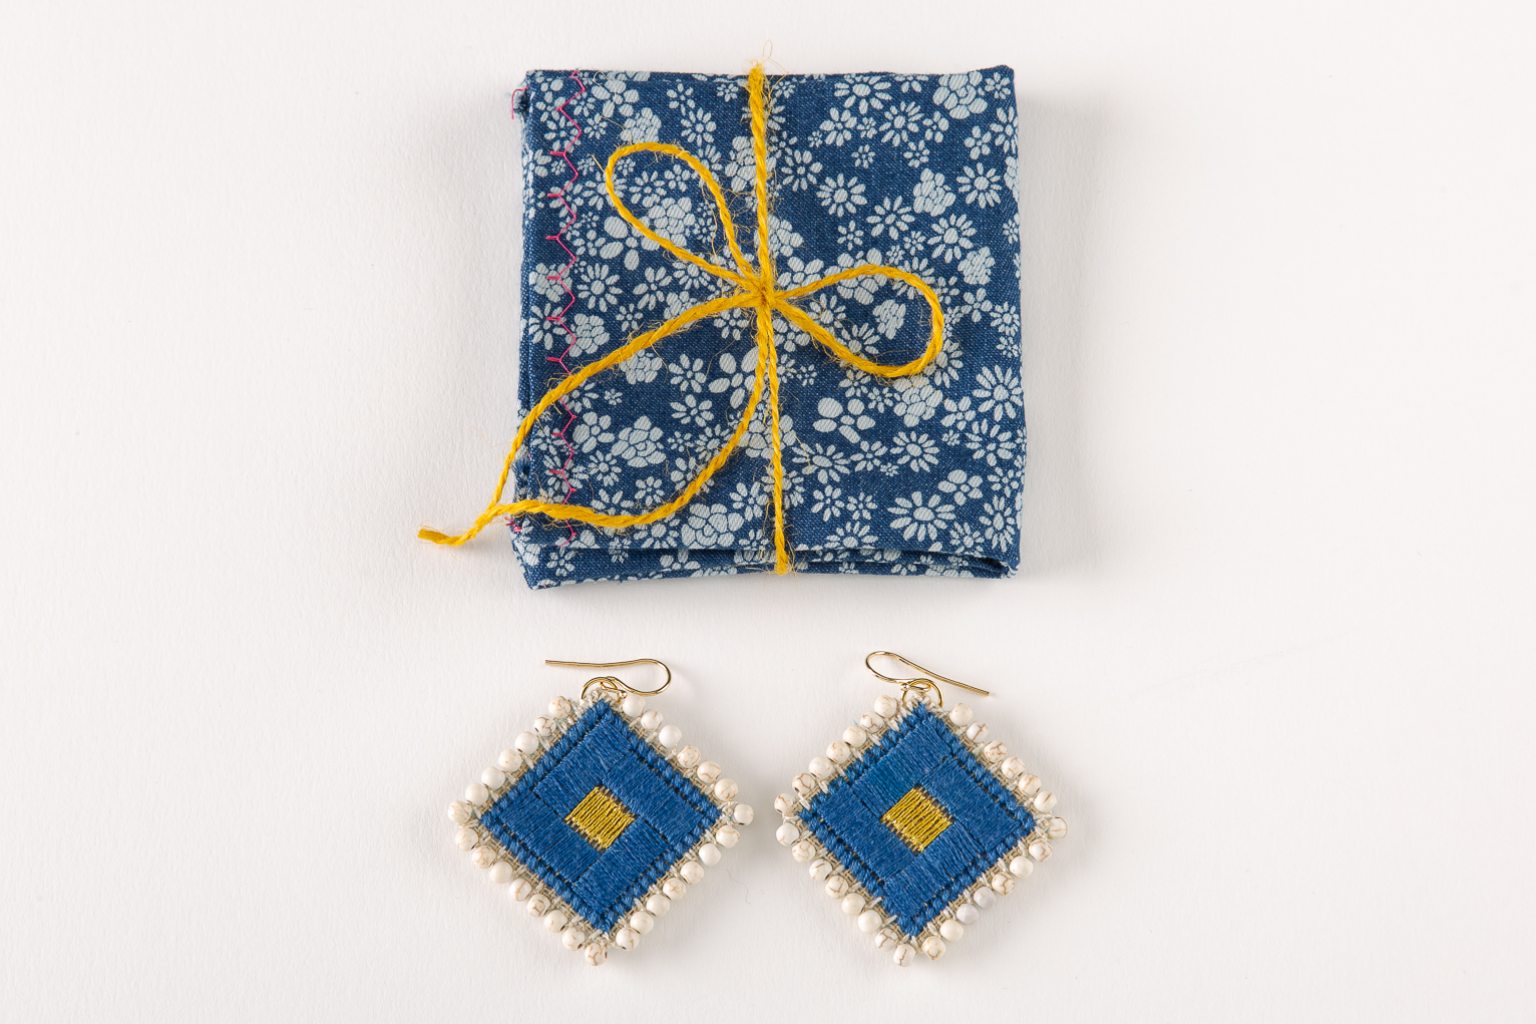 Blue hand-stitched earrings with white howlites